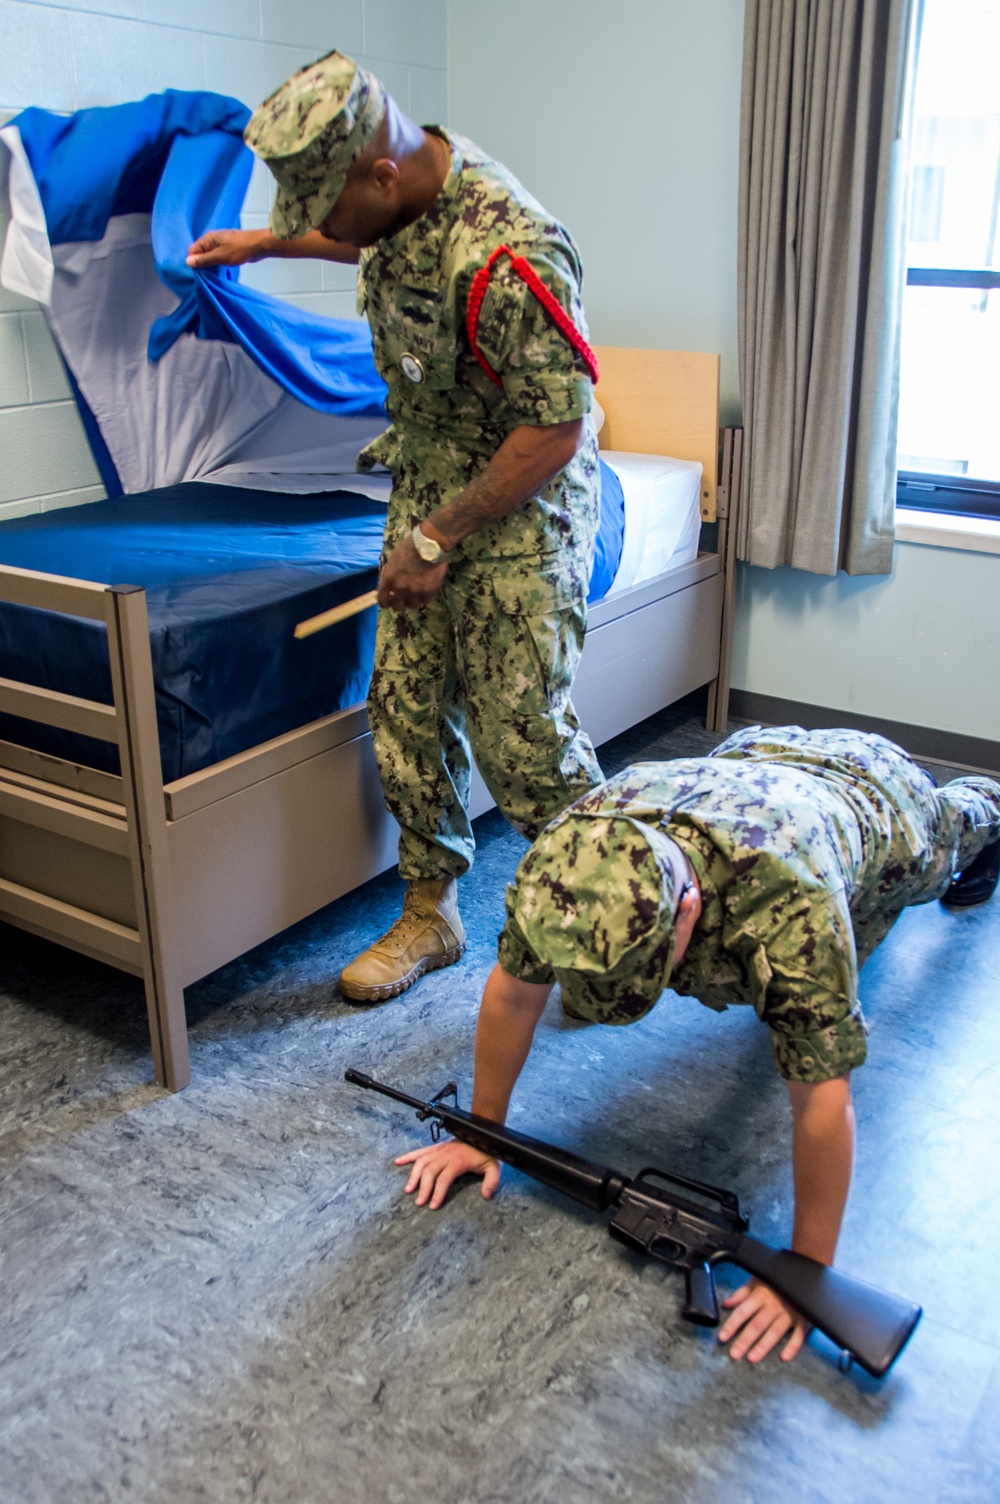 Recruit Division Commanders (RDC) here at Officer Training Command in Newport, Rhode Island (OTCN) conduct room inspections as part of the Room, Locker and Personnel (RLP) inspection for Officer Candidate School (OCS) class 02-20 on Sept. 5, 2019.